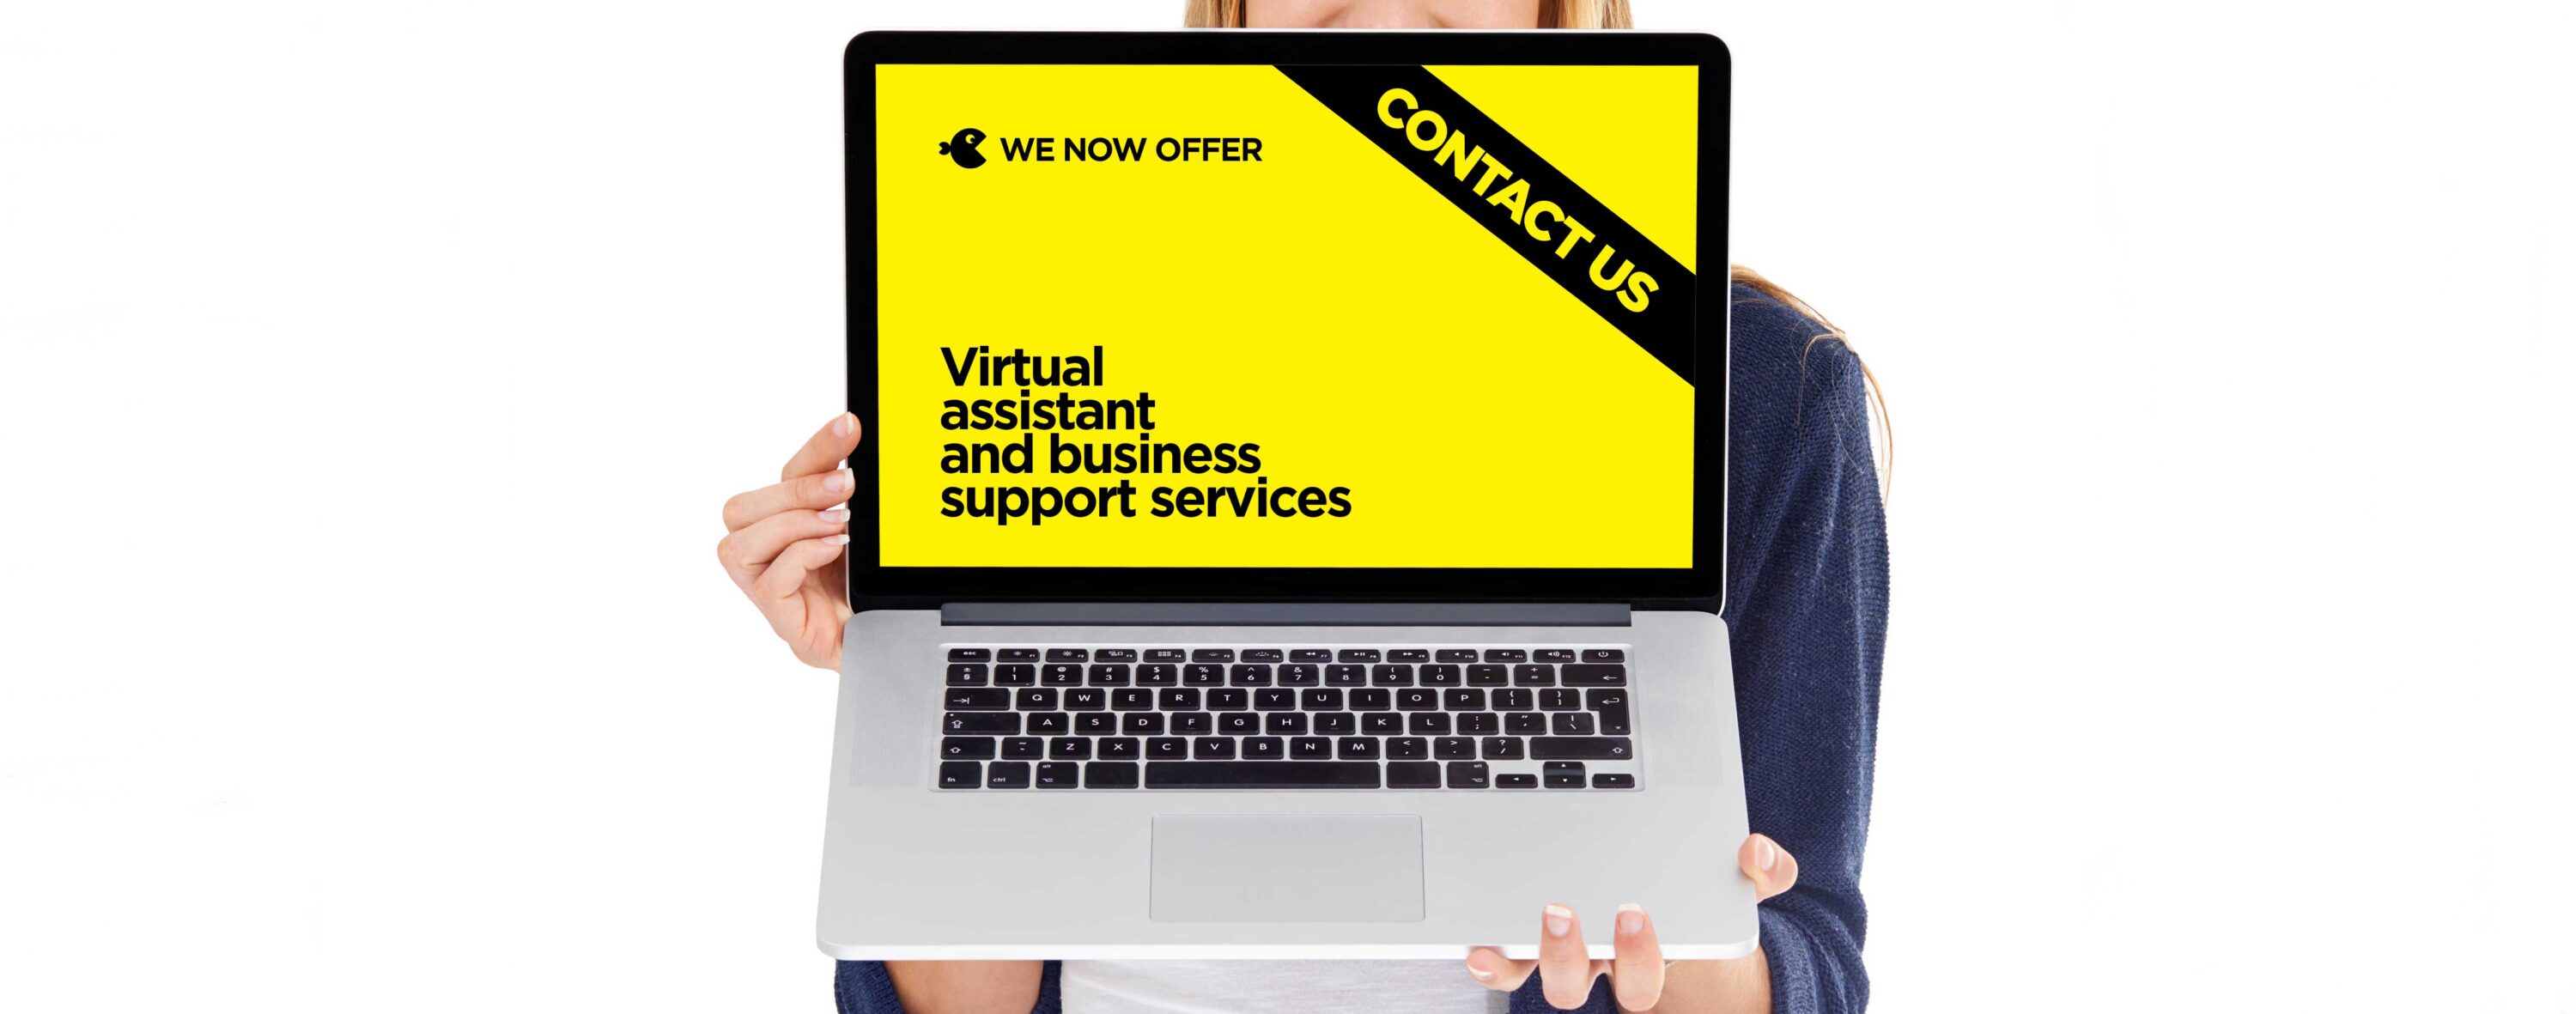 Virtual assistant and business support services now available from Littlefish